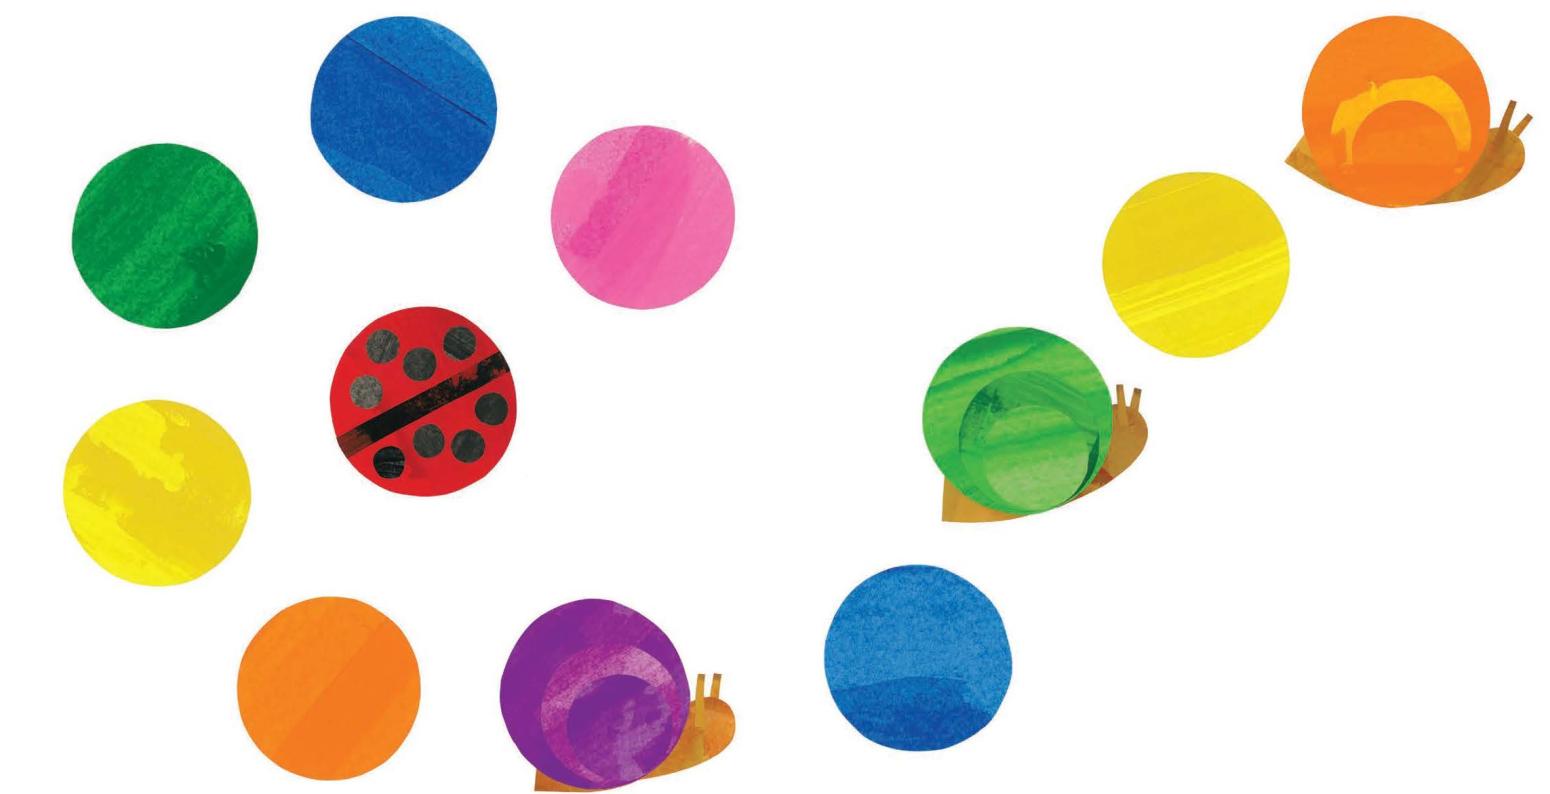 An assortment of colorful circles and snails.